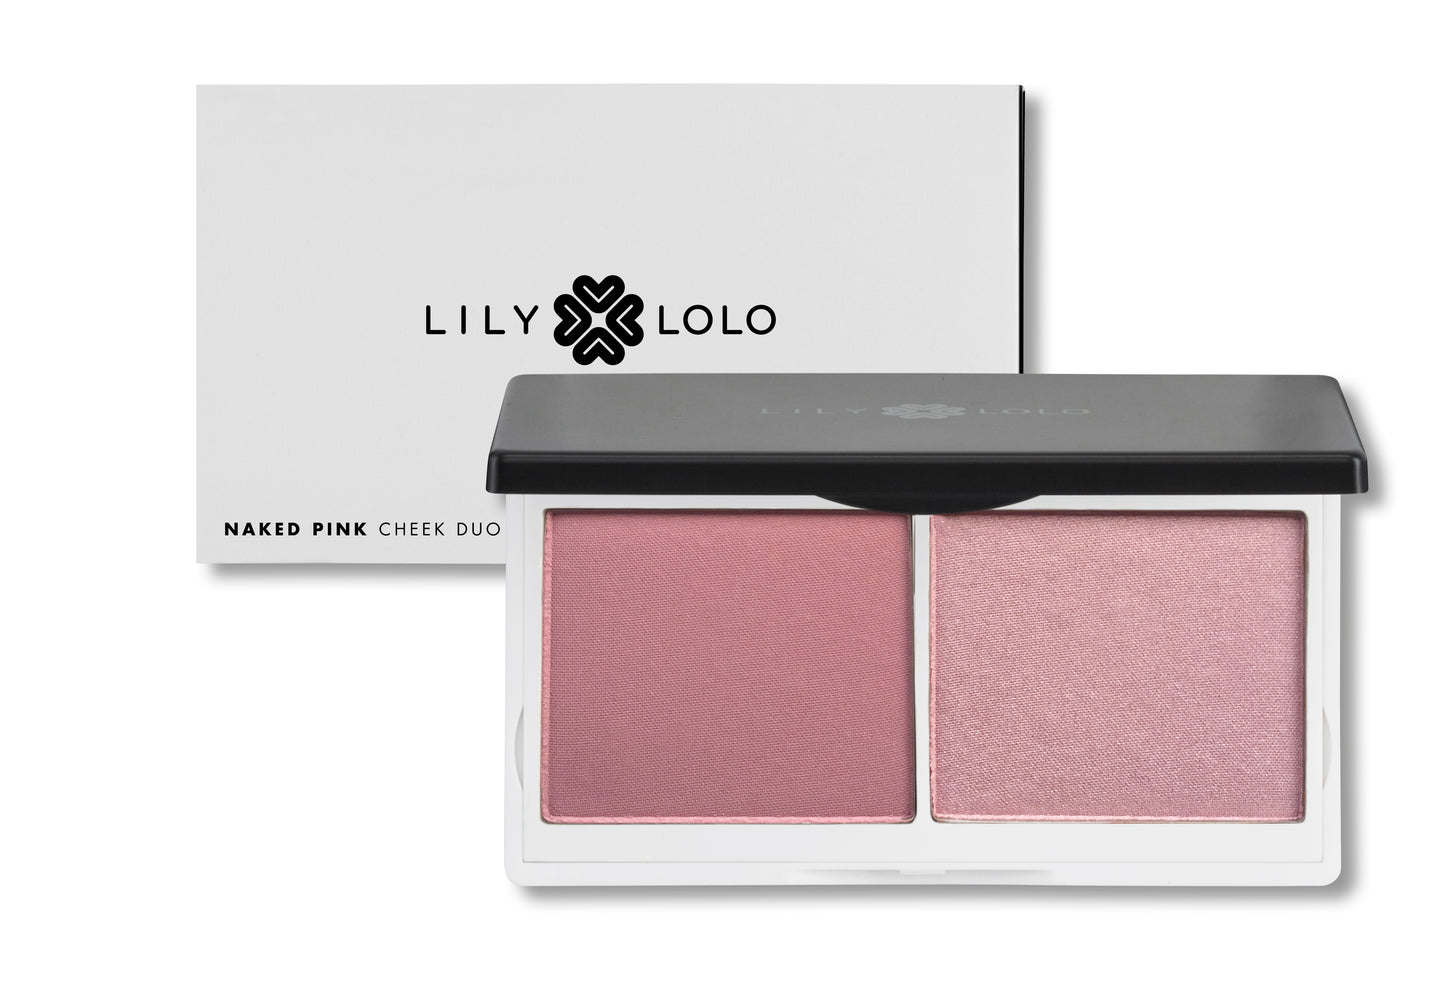 LILY LOLO - Naked Pink Cheek Duo